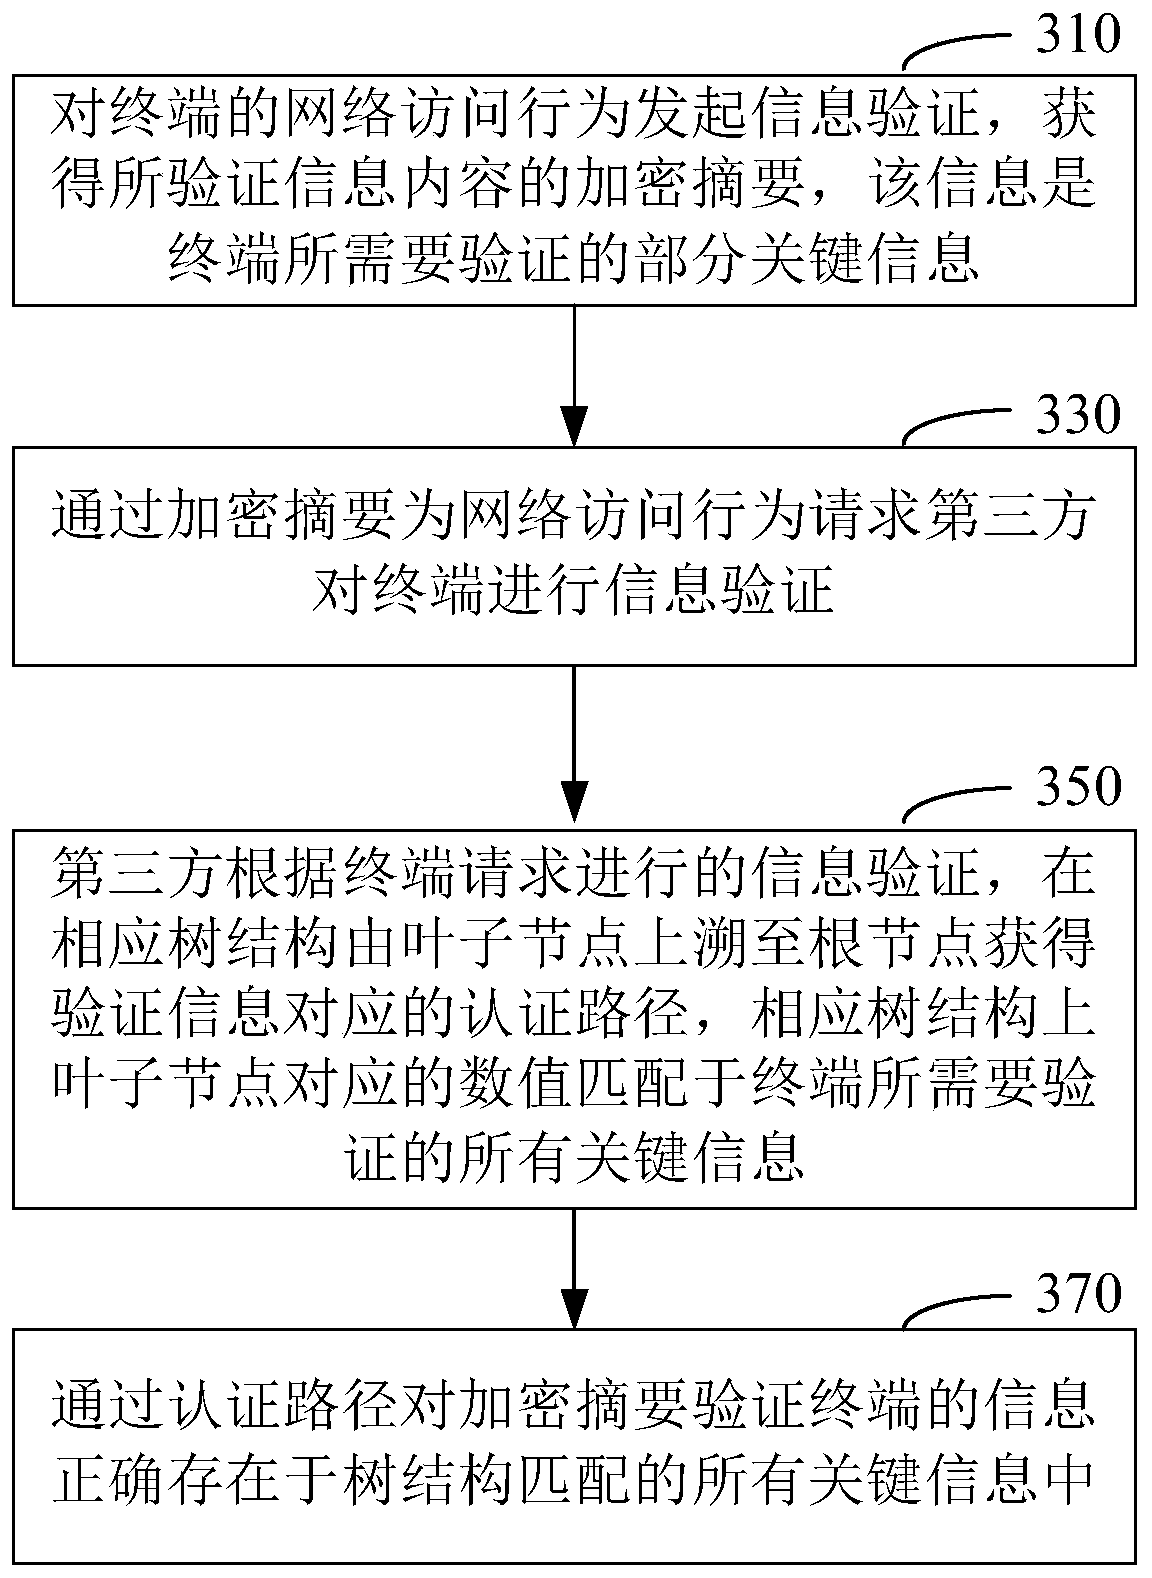 Method and device for realizing information verification, computer system and storage medium